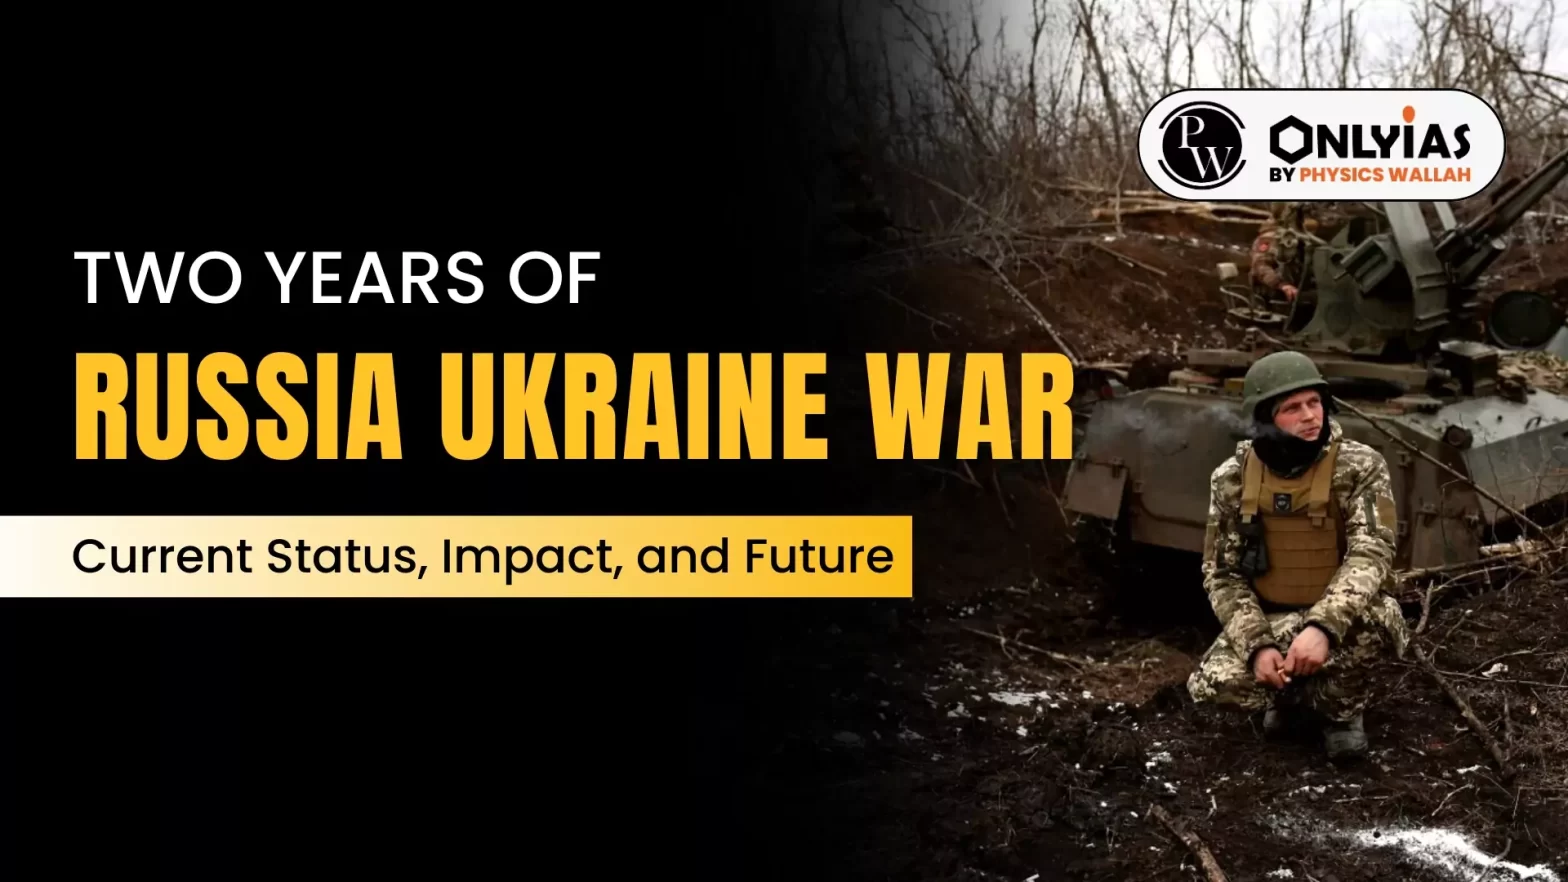 Two Years of Russia Ukraine War: Current Status, Impact, and Future